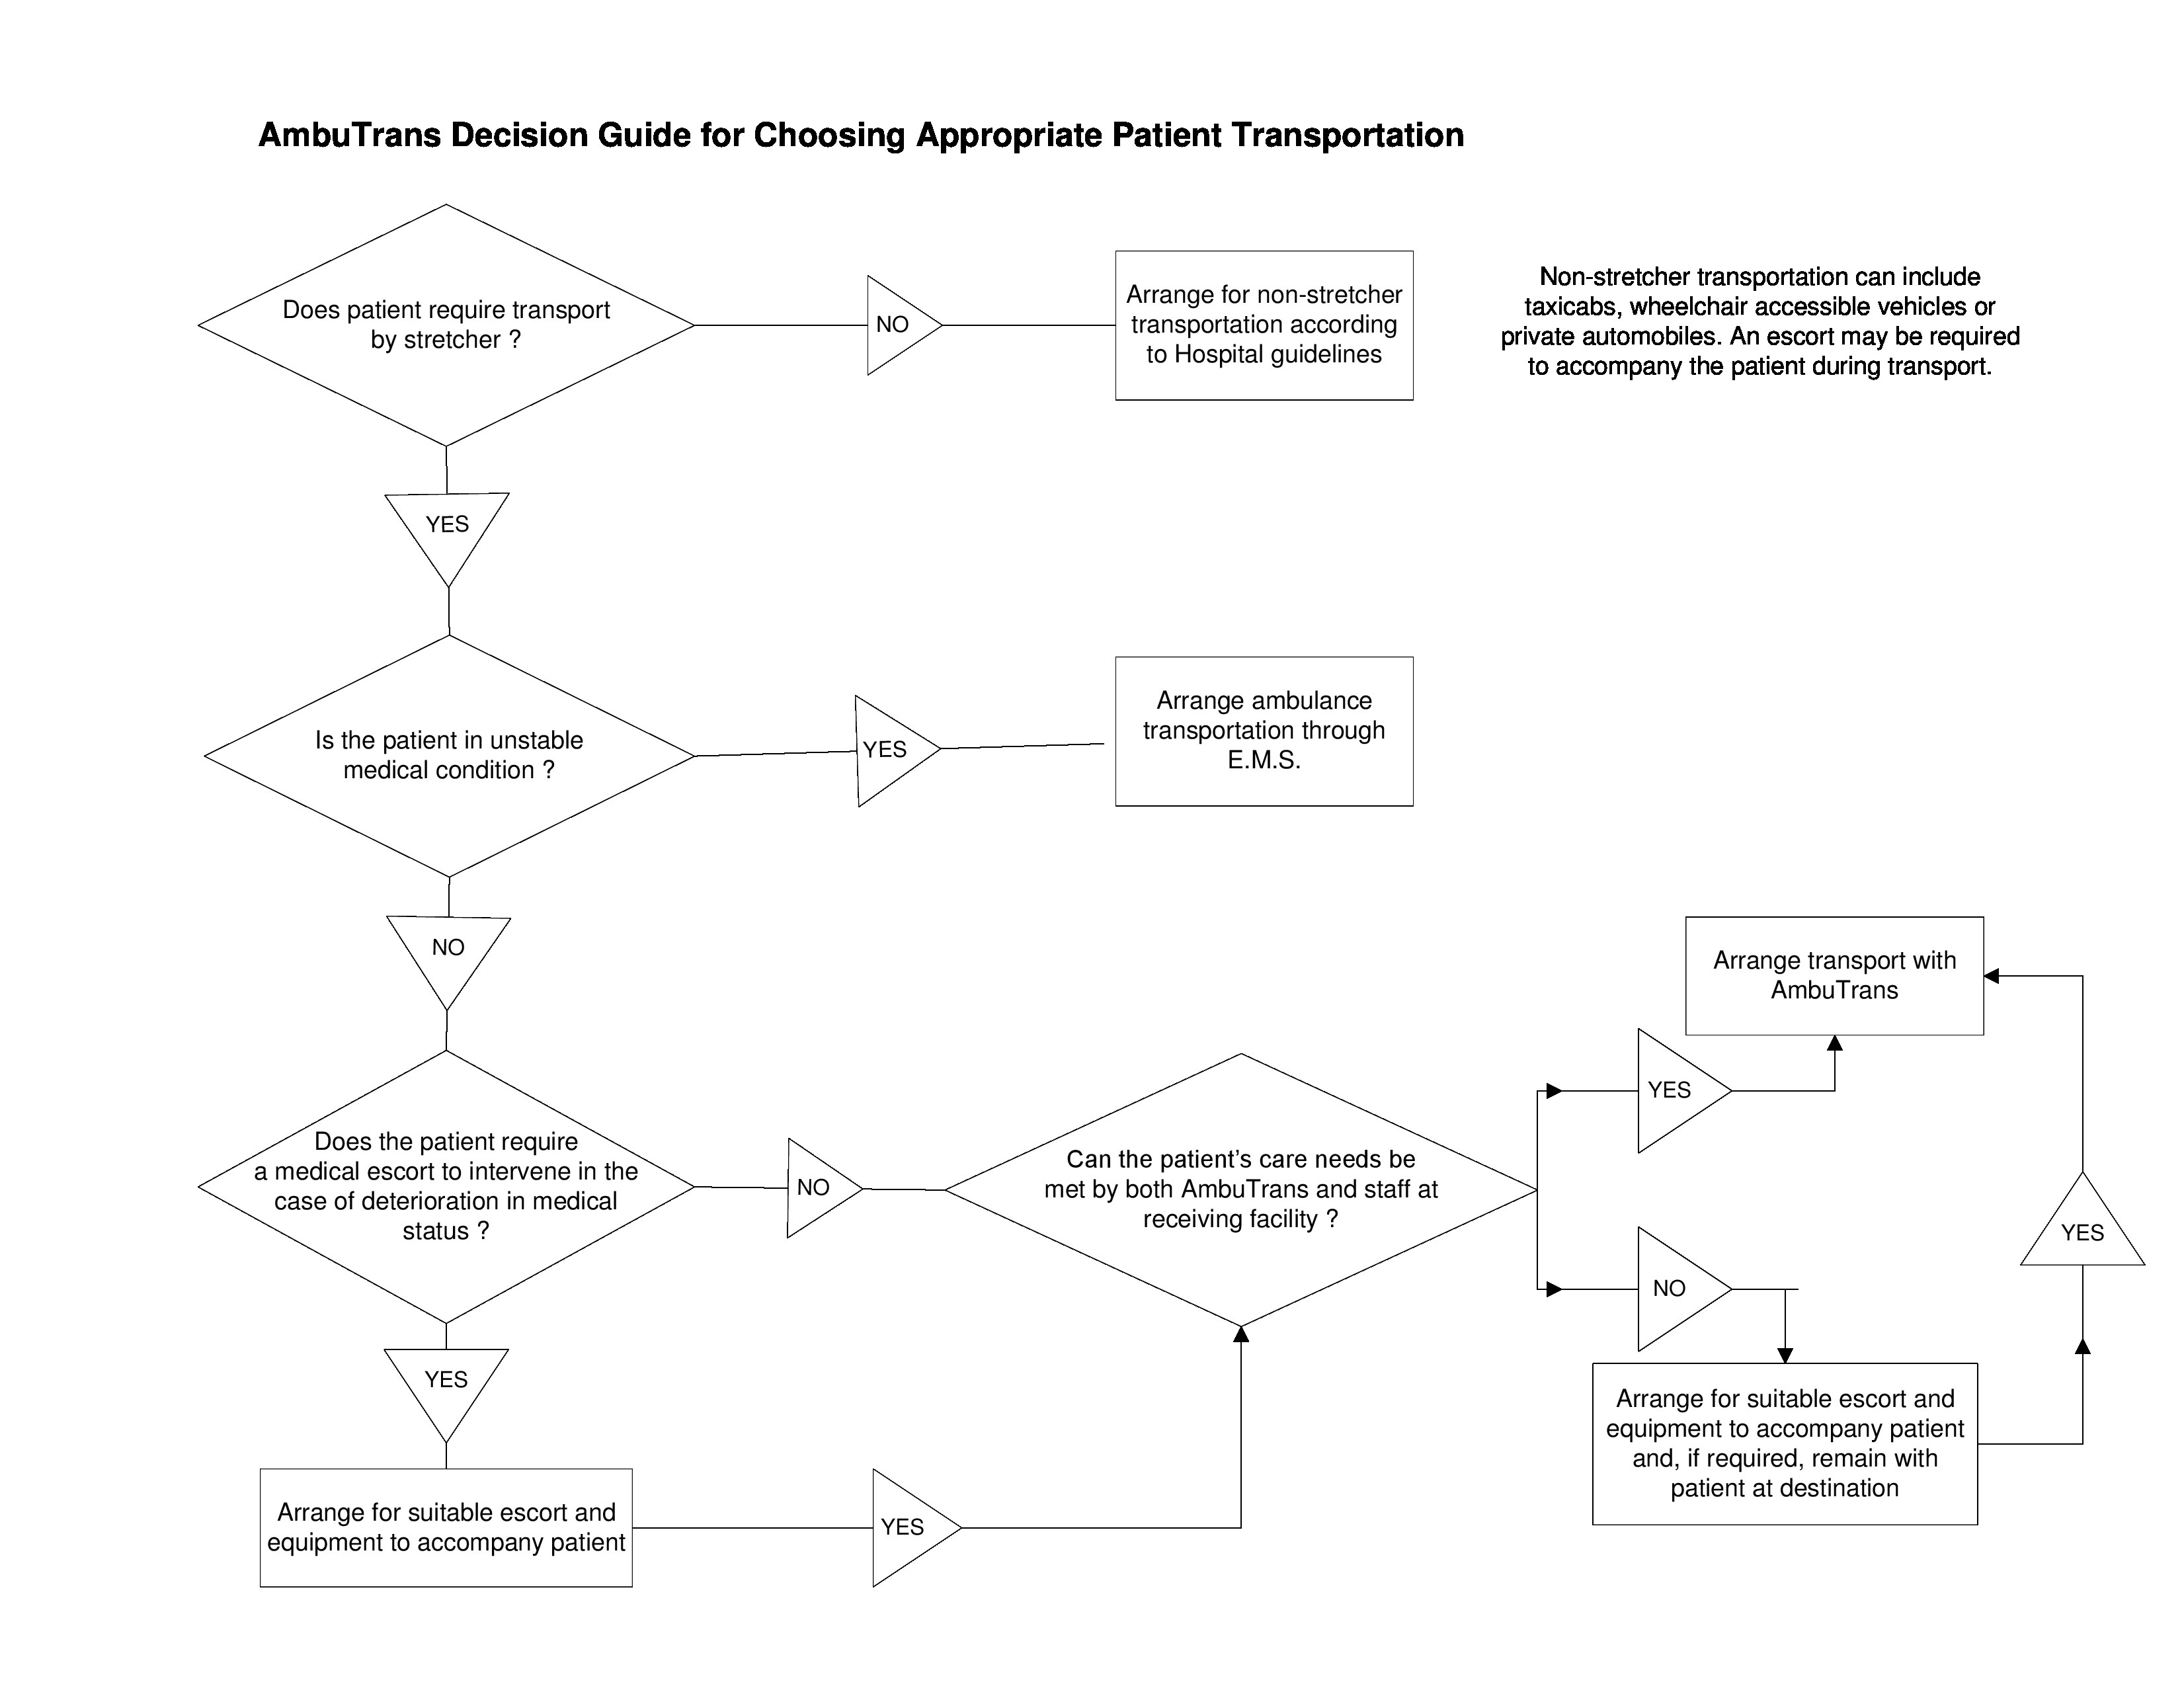 Users Guidlines for AmbuTrans Decision Guide for Choosing Appropriate Patient Transportation